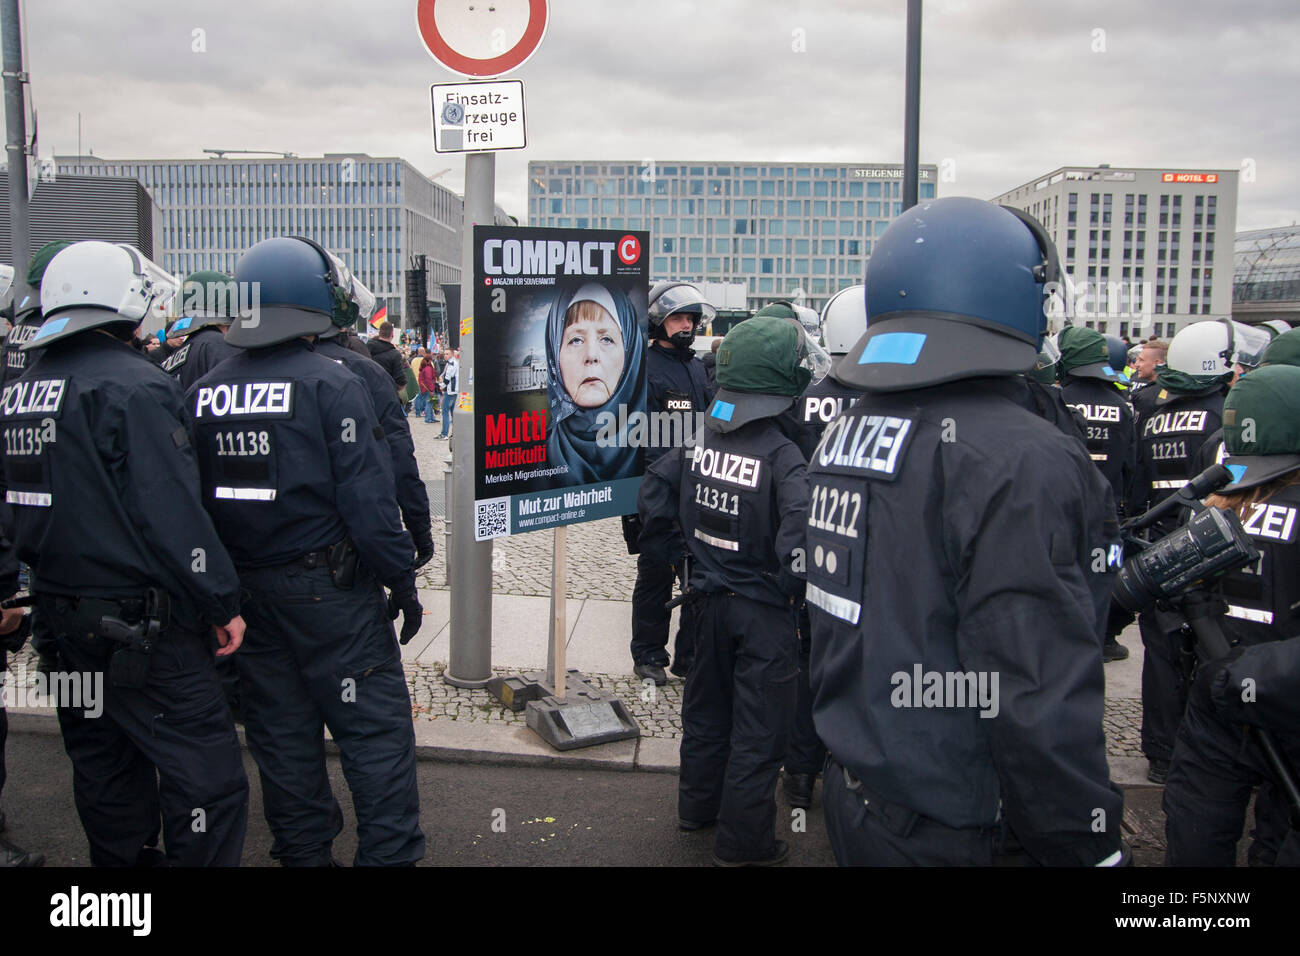 Berlin, Germany. 07th Nov, 2015. Demonstration by German party AfD in Berlin, Germany. A sign showing Angela Merkel and a group of Police officers. Stock Photo